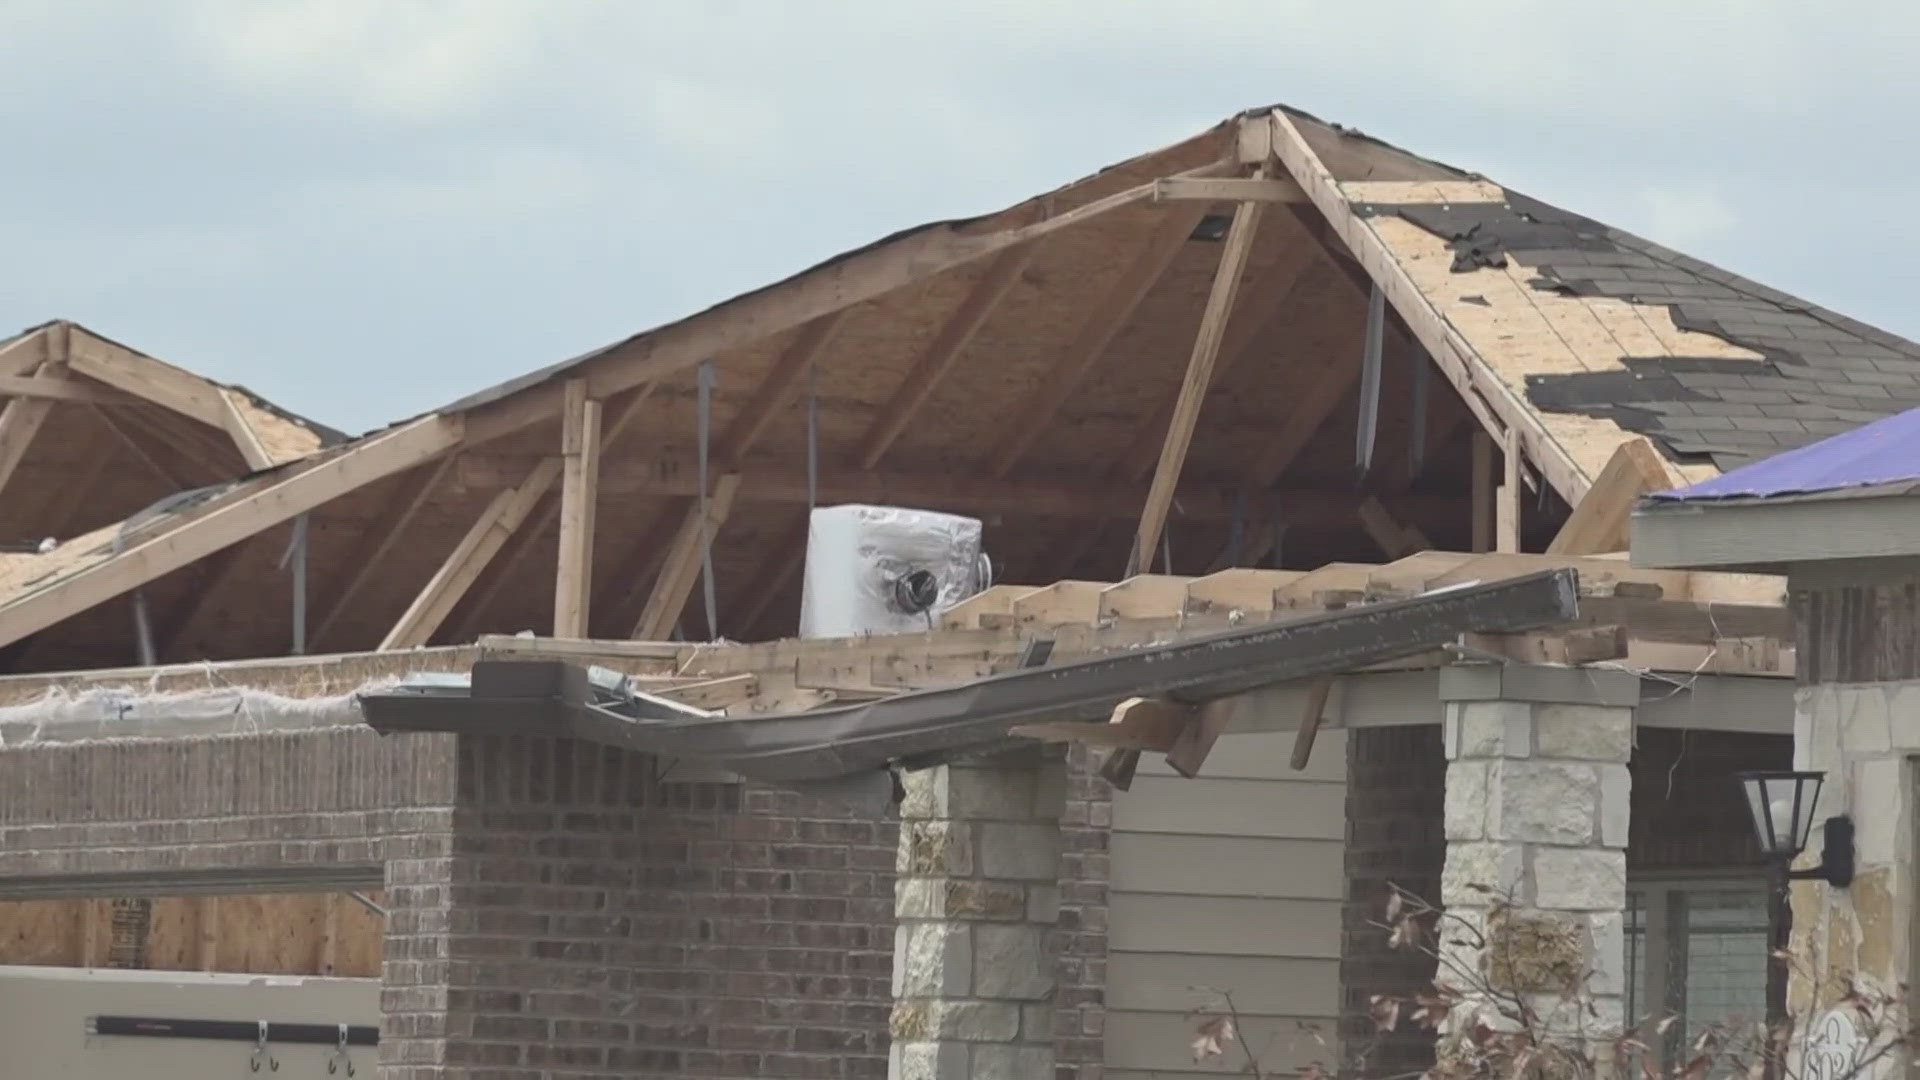 May 22 is a day many in Temple will never forget, as one month prior, two tornadoes touched down in the area, the community is still working to return to normalcy.